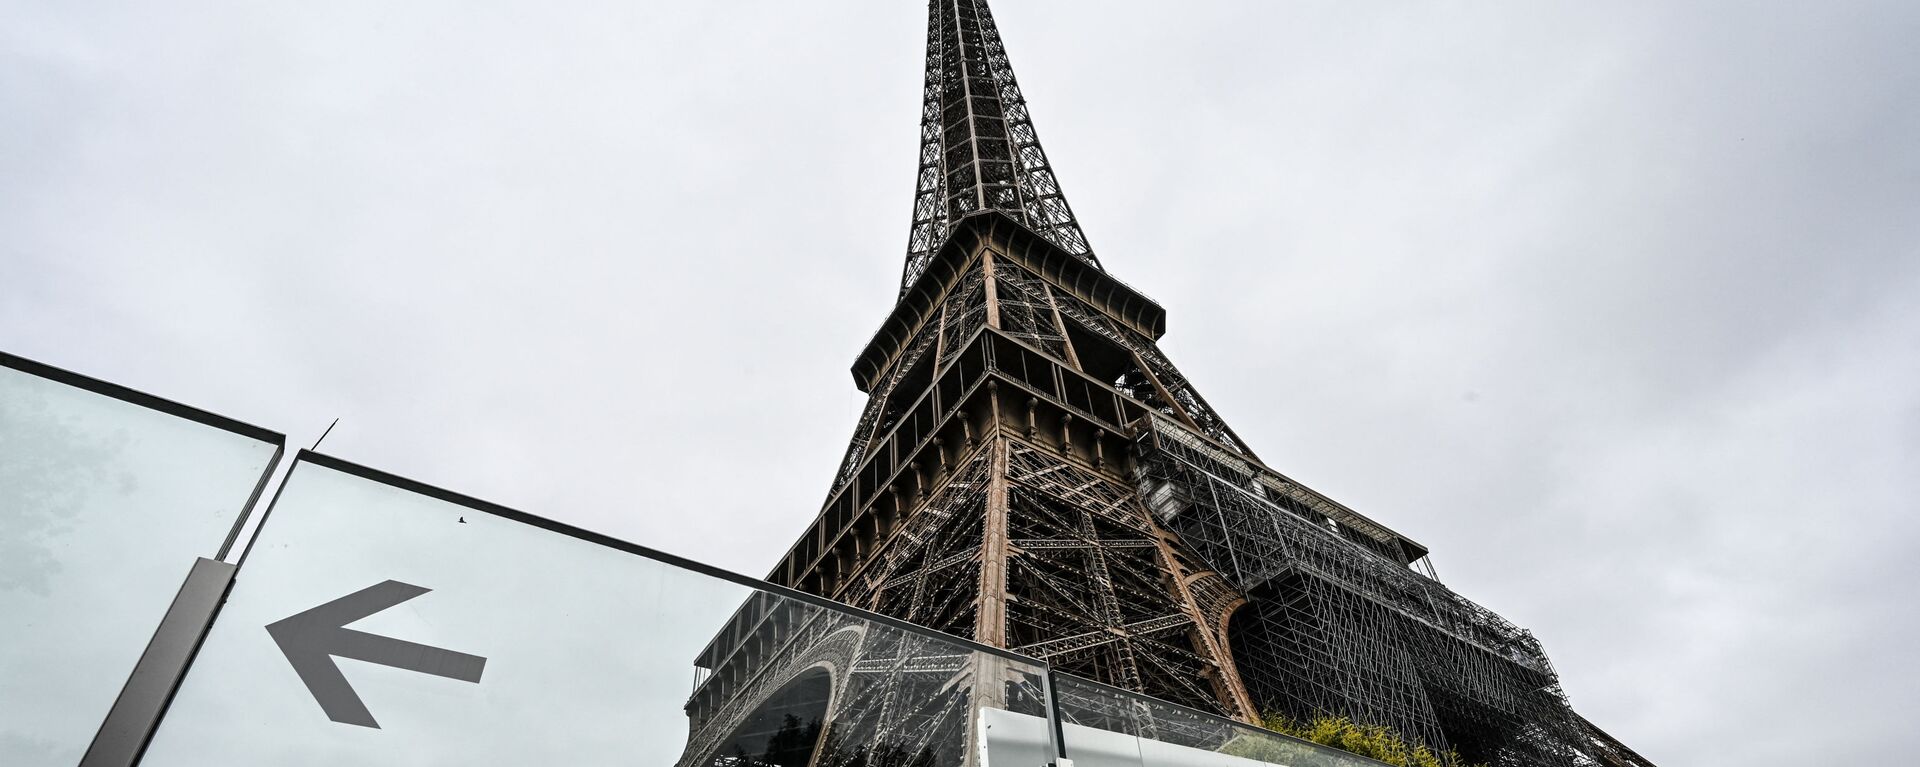 This picture taken on July 16, 2021, in Paris shows the Eiffel Tower and its protective wall. - The Eiffel Tower reopened to visitors on July 16, 2021, after nine months of shutdown caused by the Covid pandemic. Up to 13,000 people per day will be allowed to take the elevators to the top and take in the views over the French capital, down from 25,000 in the pre-Covid era.  - Sputnik International, 1920, 16.07.2021